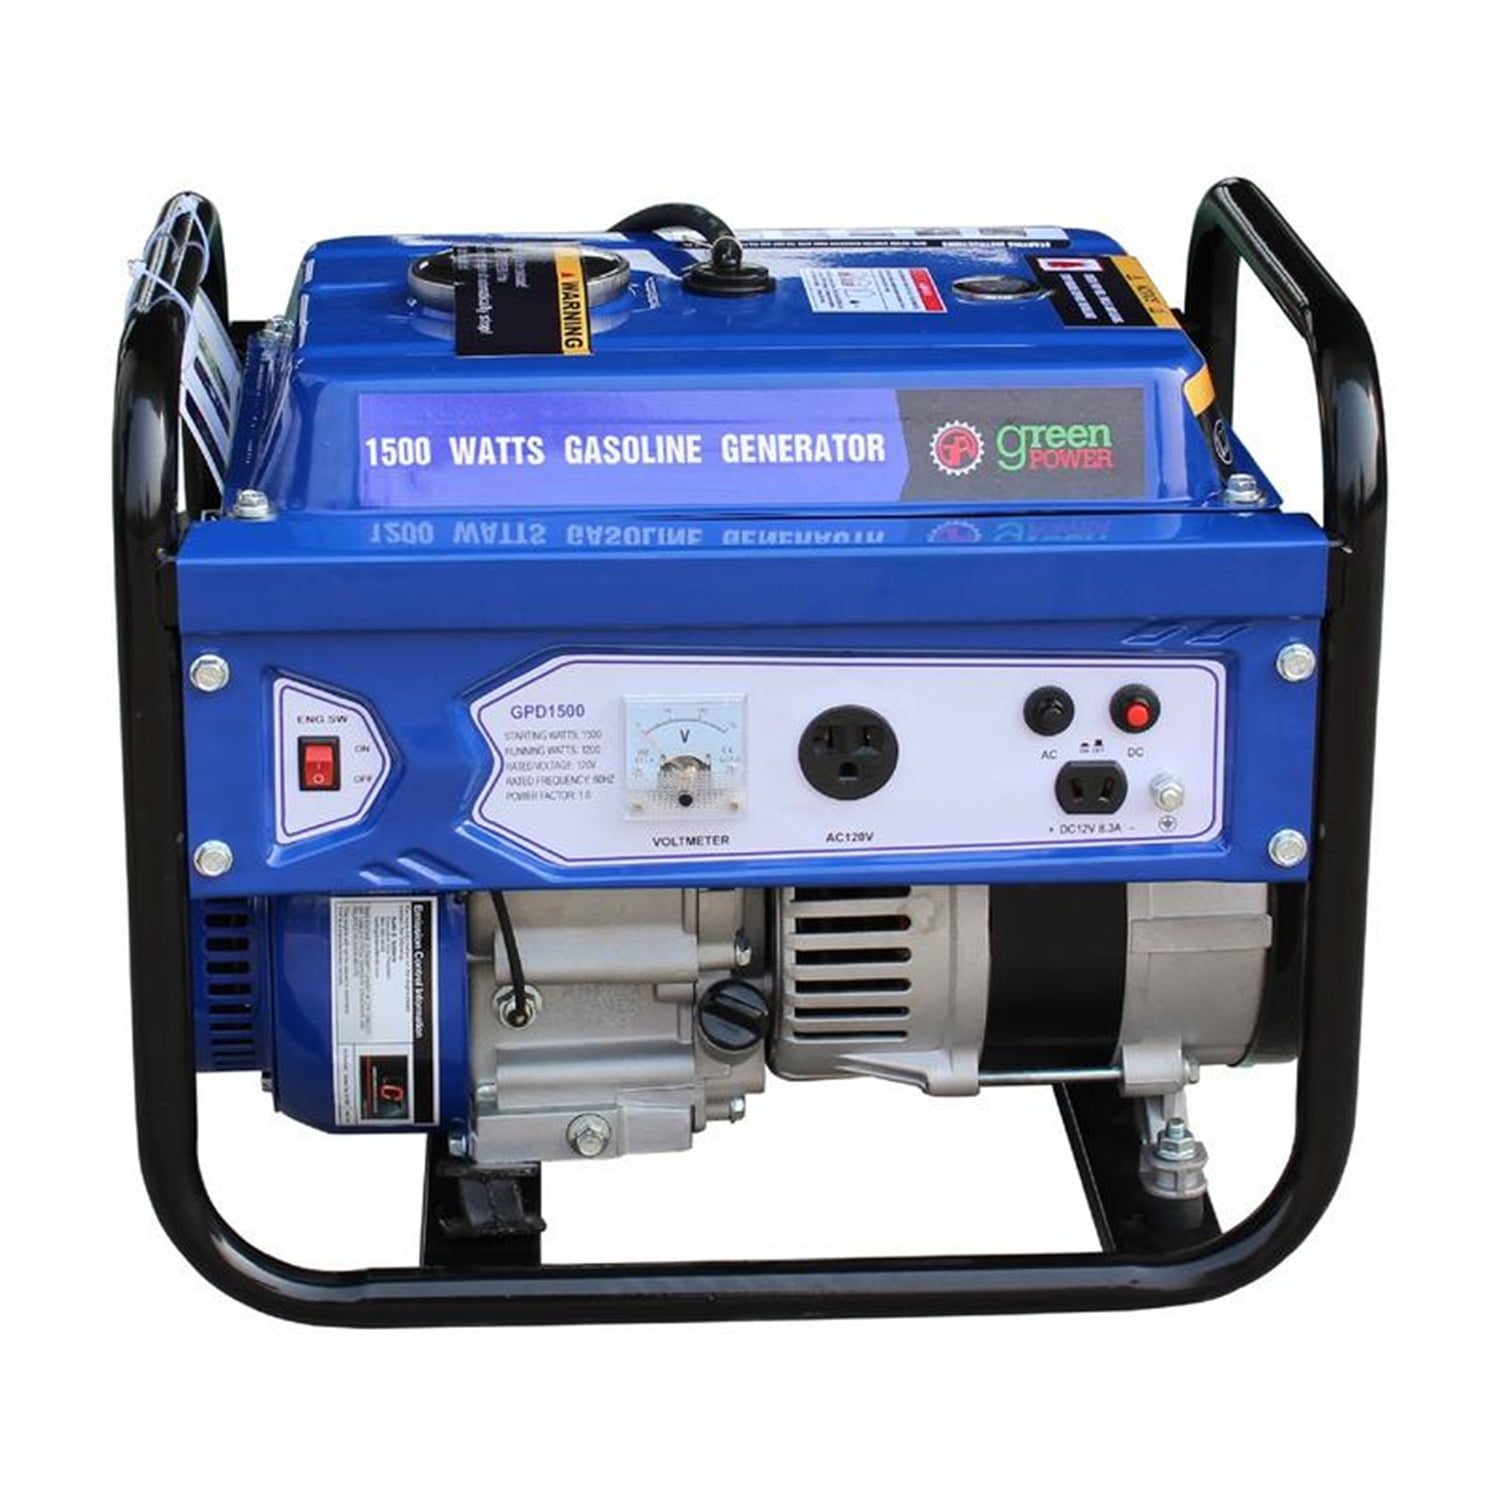 Powered Portable Consumer Select Series Recoil Start Generator-Engine Power:1500 Watts of starting power and 1200 Watts of running power - with 99cc 3HP OHV Engine - Walmart.com